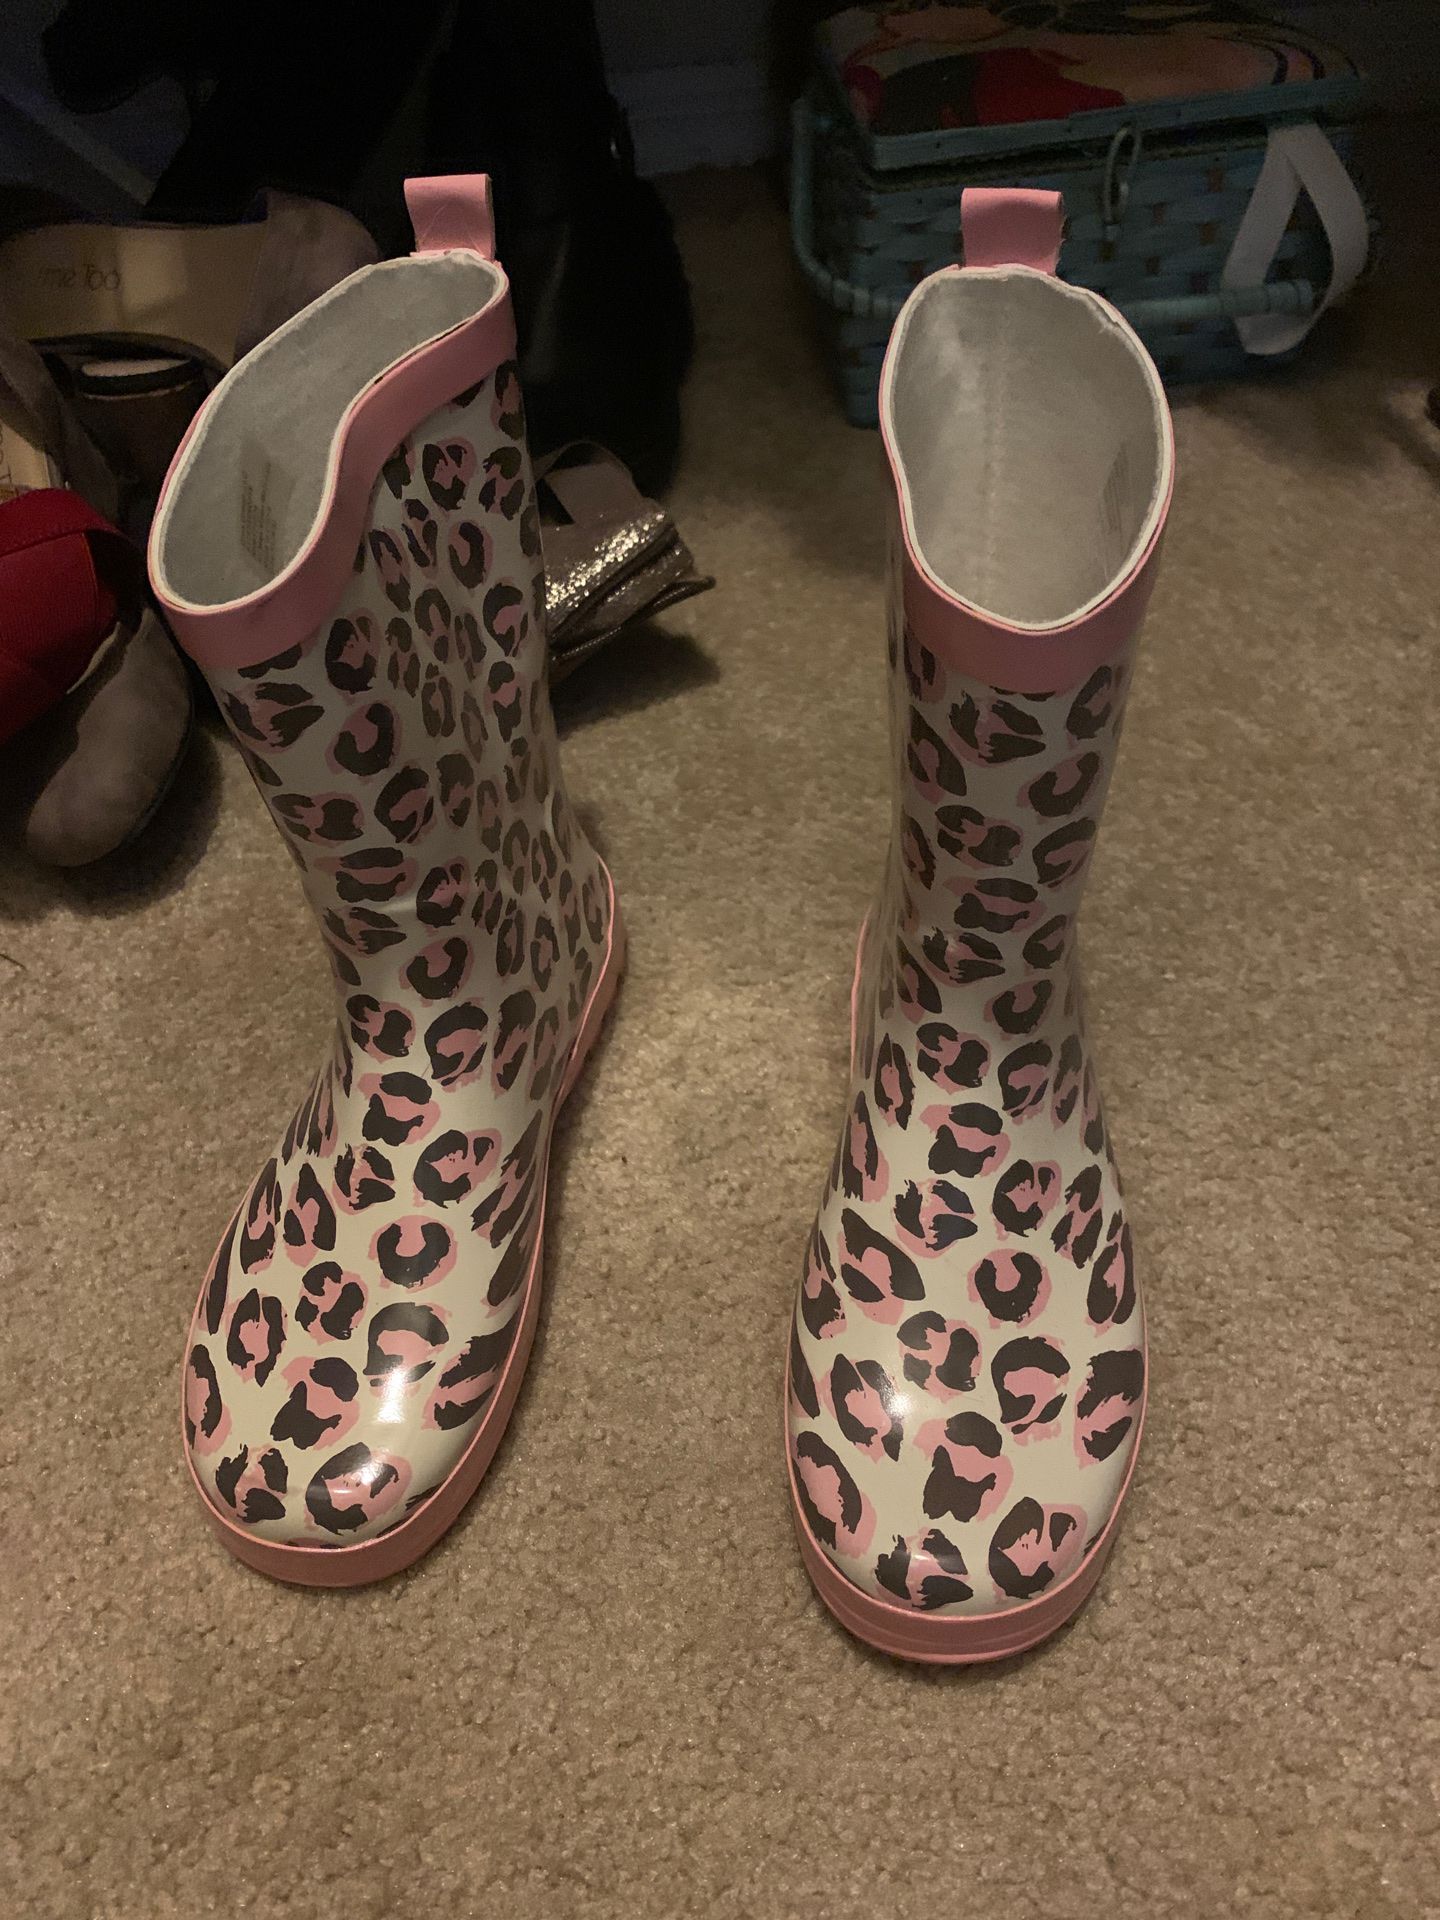 Kids 4-5 rain boots pink and brown leopard print